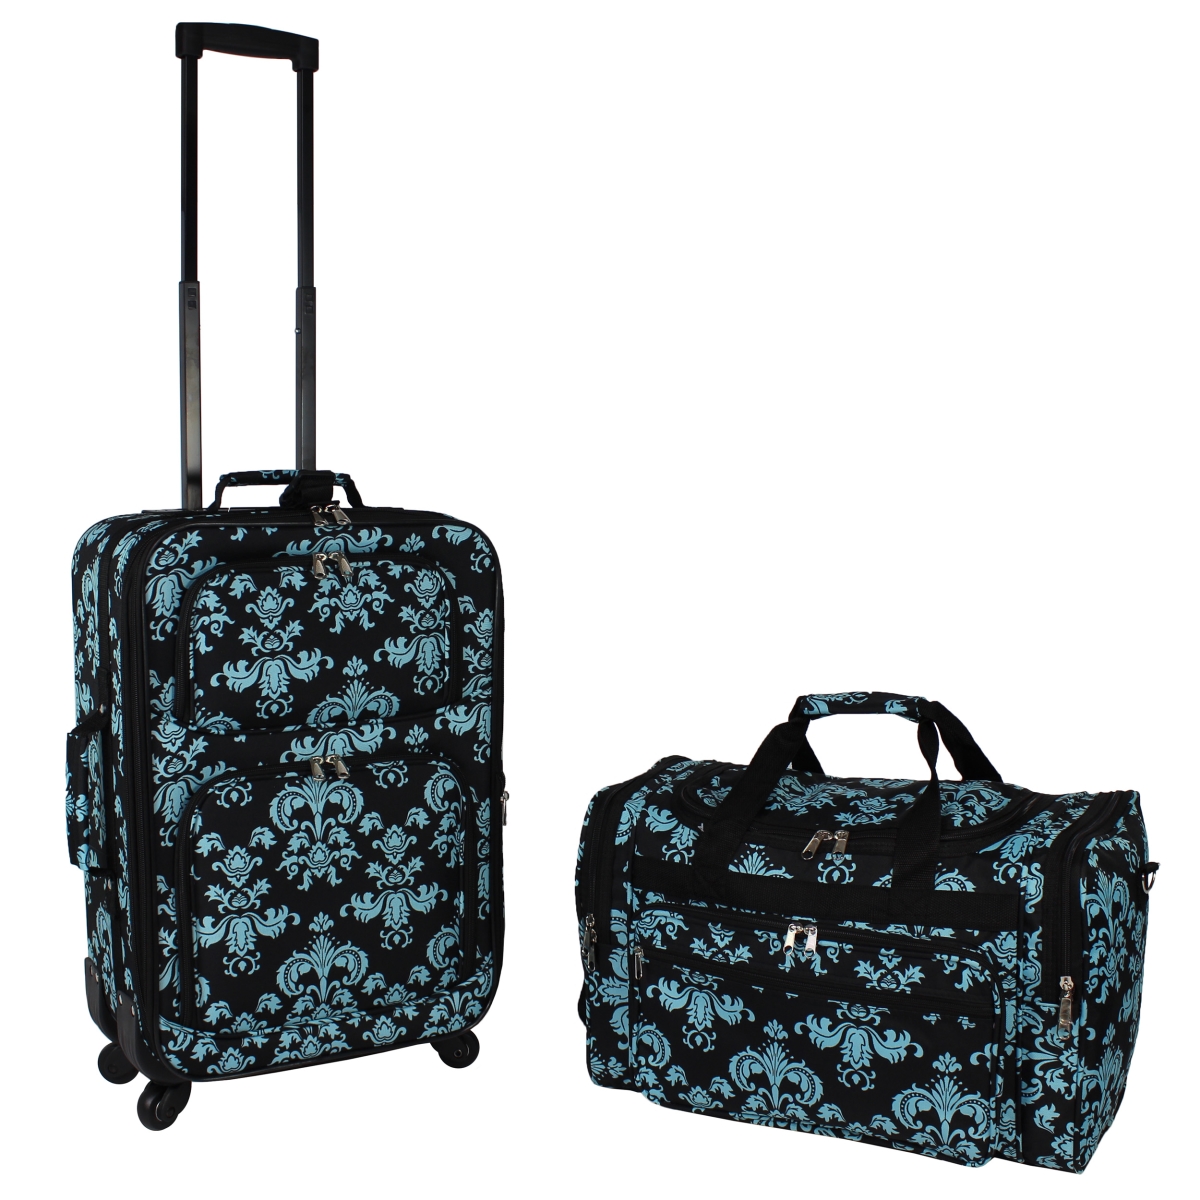 Wt8701-2-633 Carry On Expandable Spinner Luggage Set - Black Blue Damask, 2 Piece